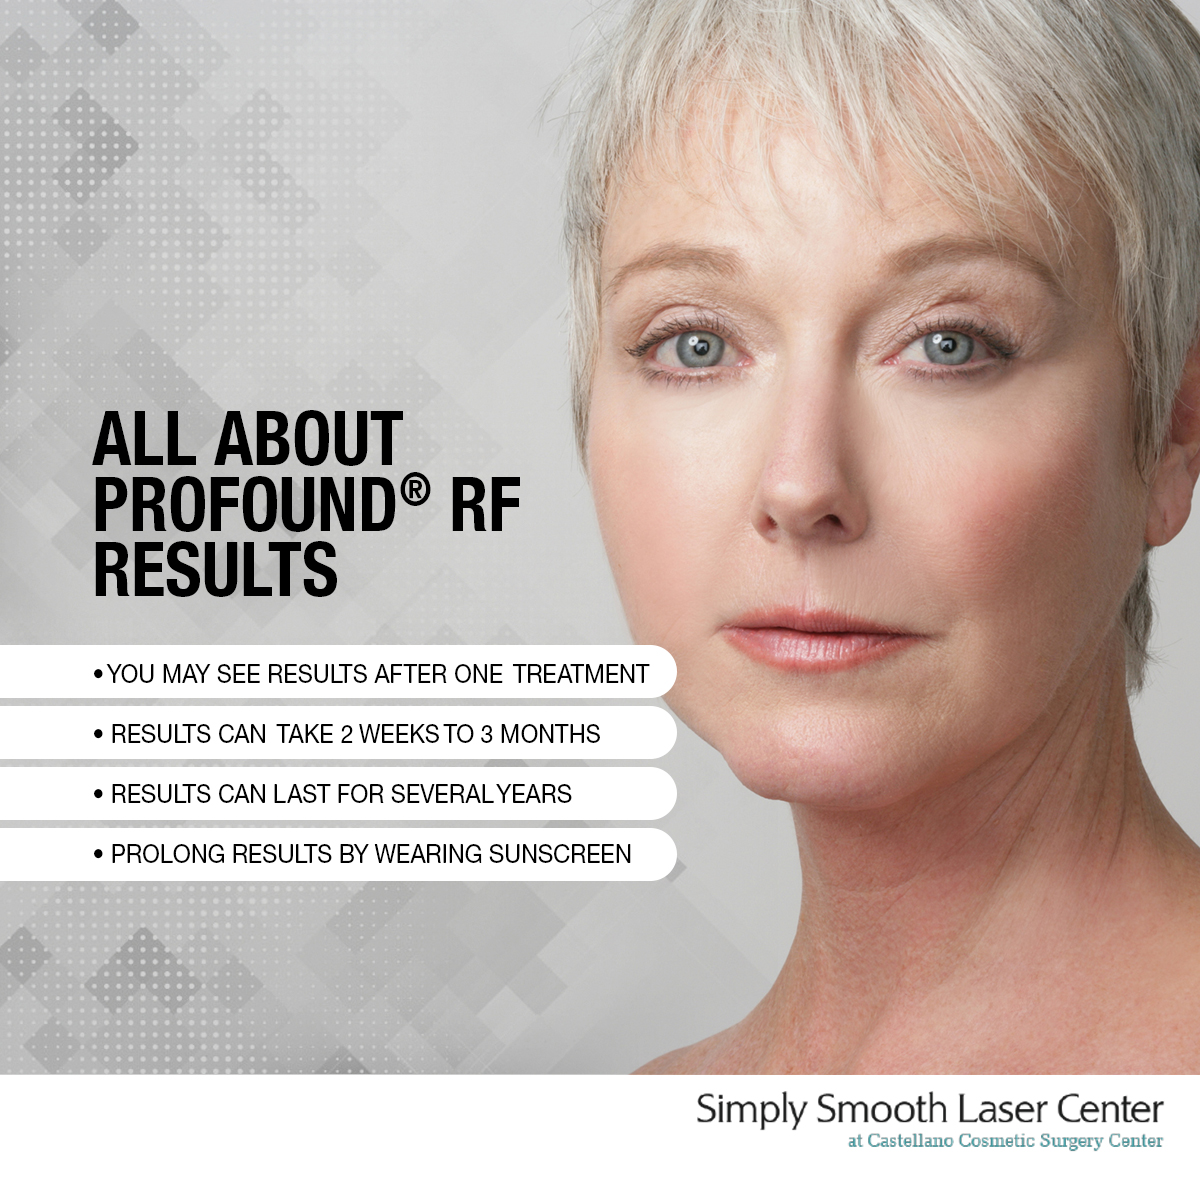 View our December 2020 infographic from Simply Smooth Laser Center in Tampa, Florida.